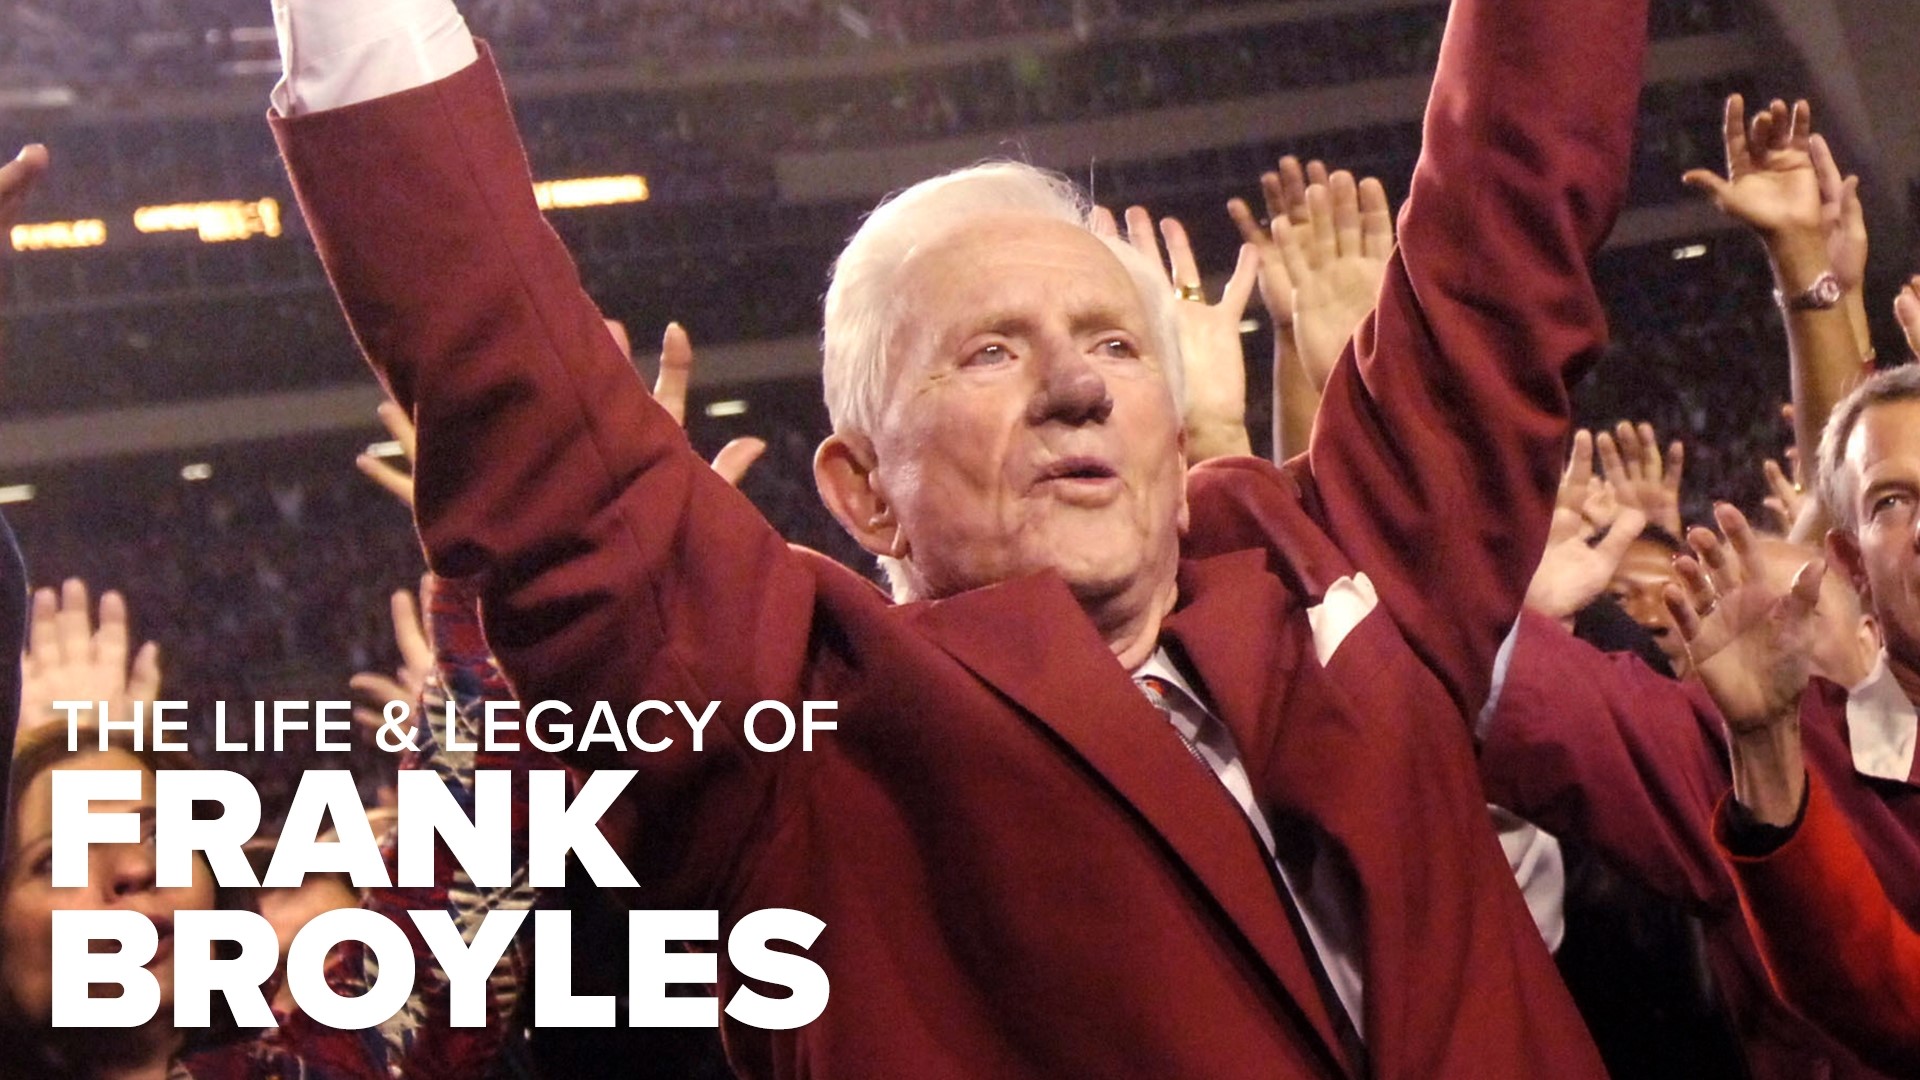 In August 2017, Frank Broyles passed away at the age of 92. We remembered his life and legacy with the Arkansas Razorbacks.